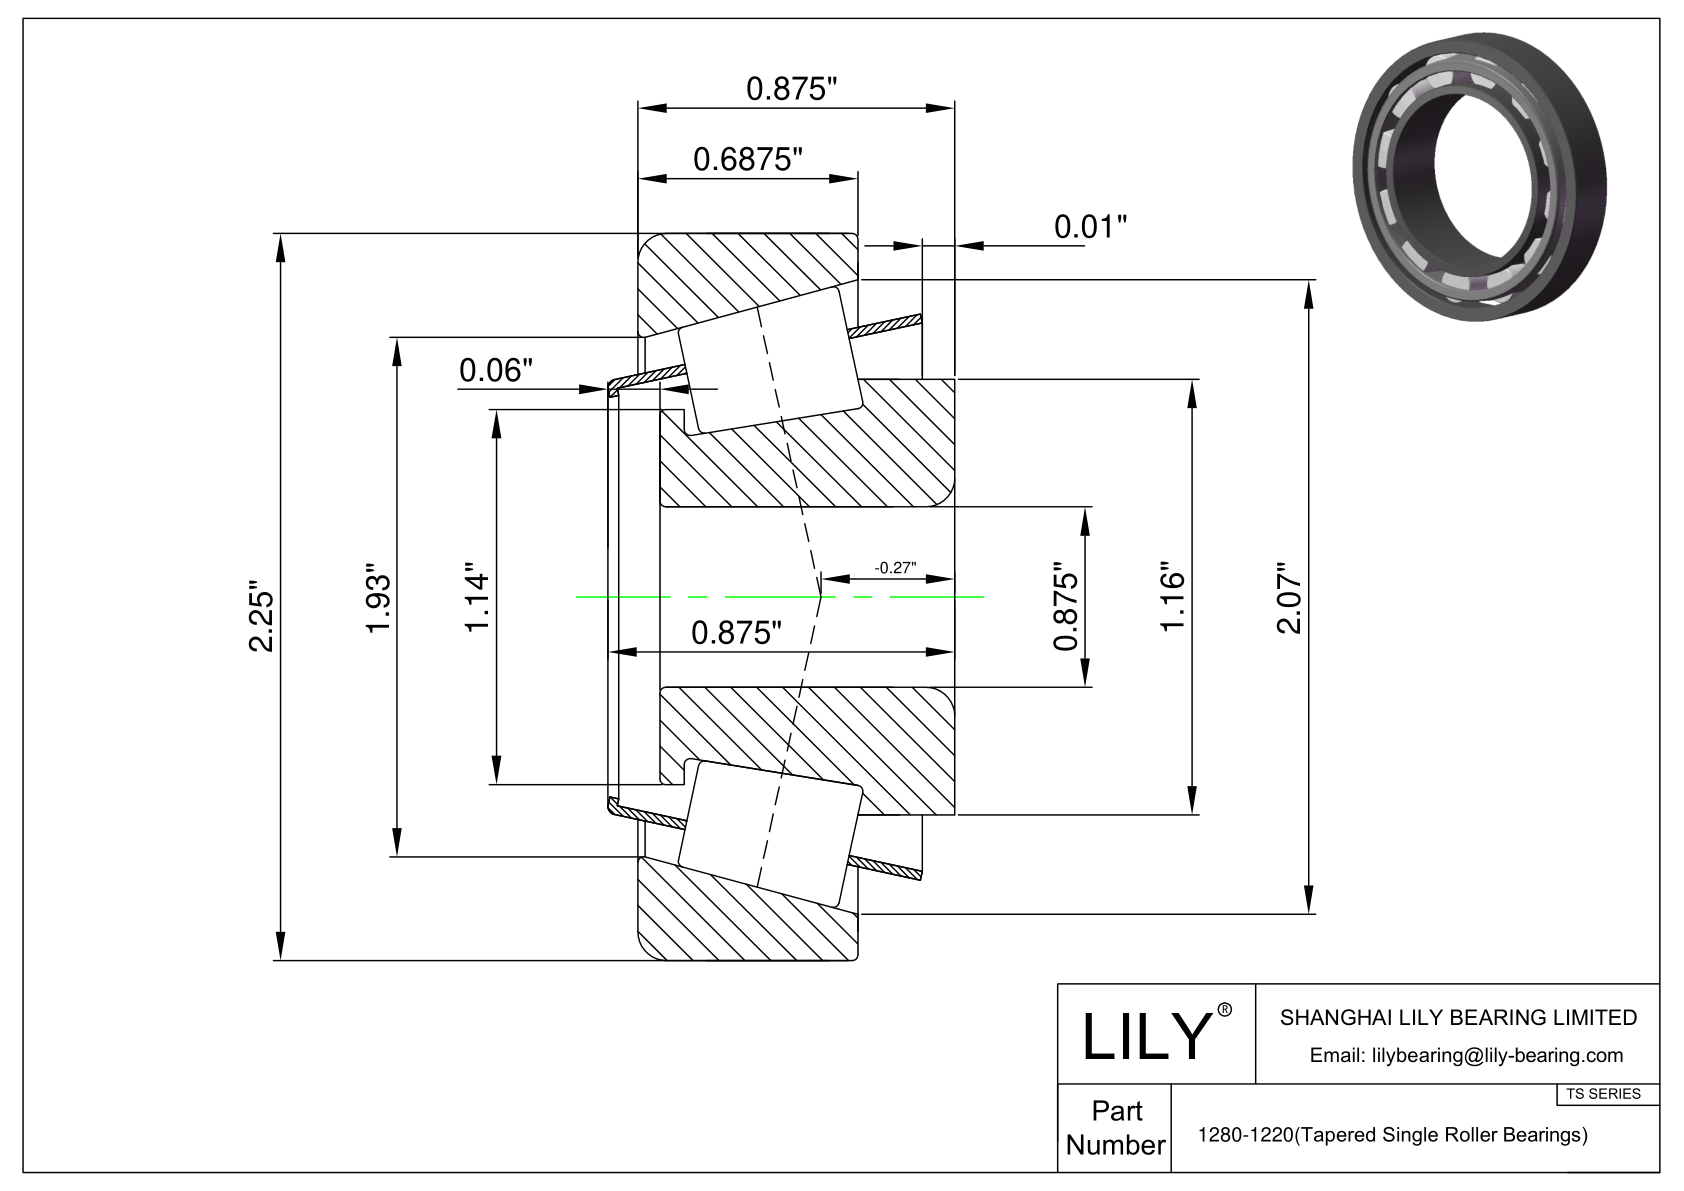 1280-1220 TS (Tapered Single Roller Bearings) (Imperial) cad drawing